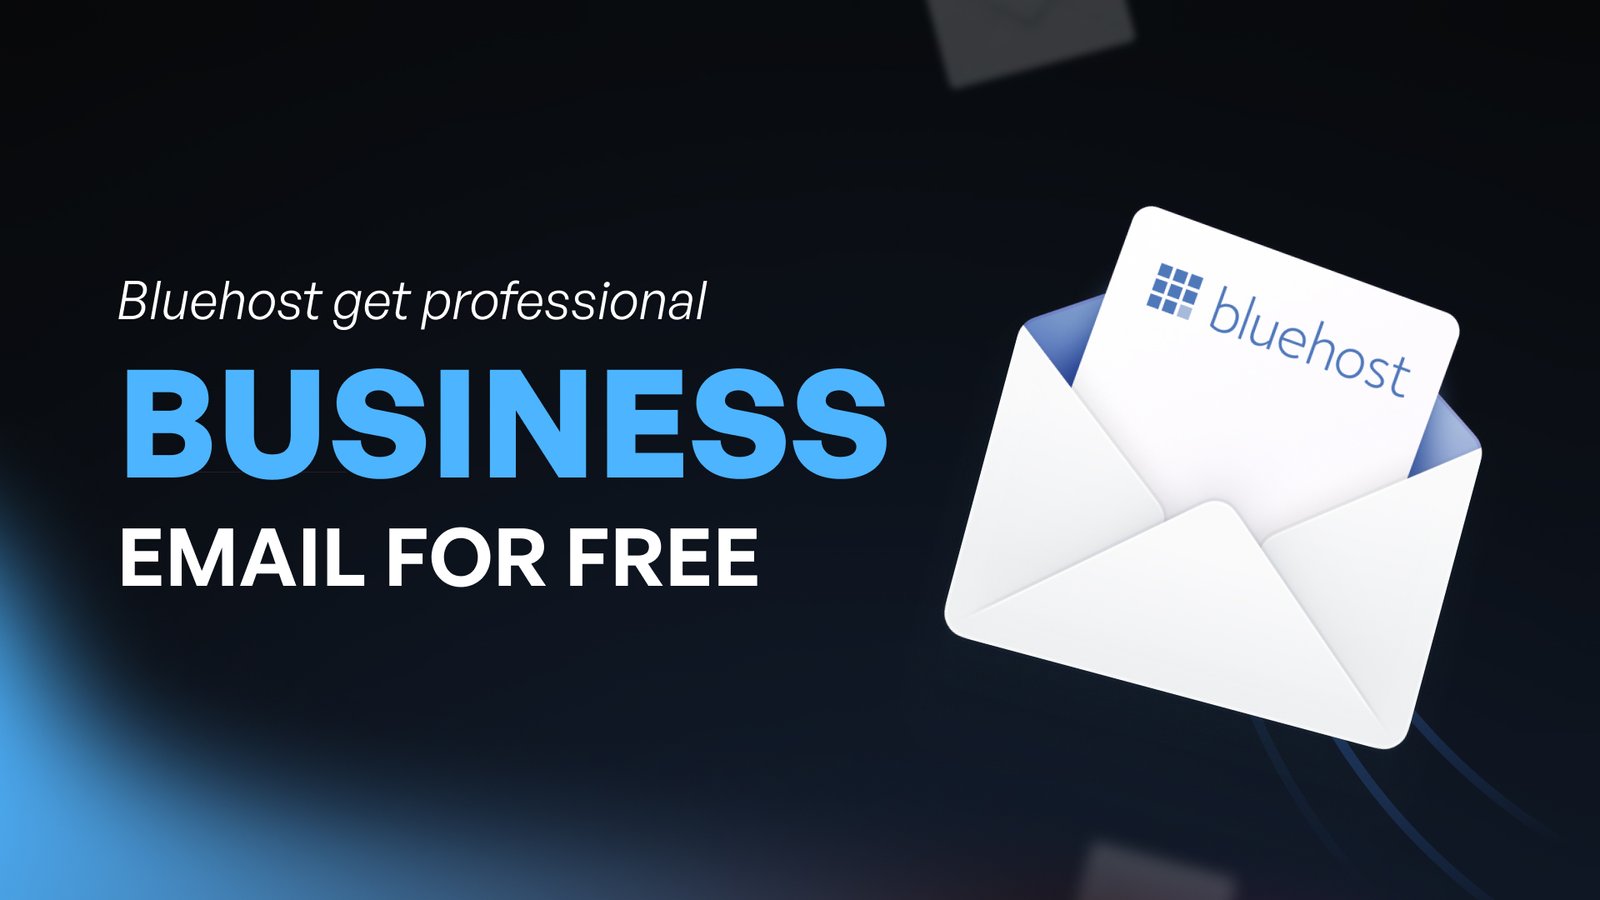 Bluehost business email: How to get professional email for free